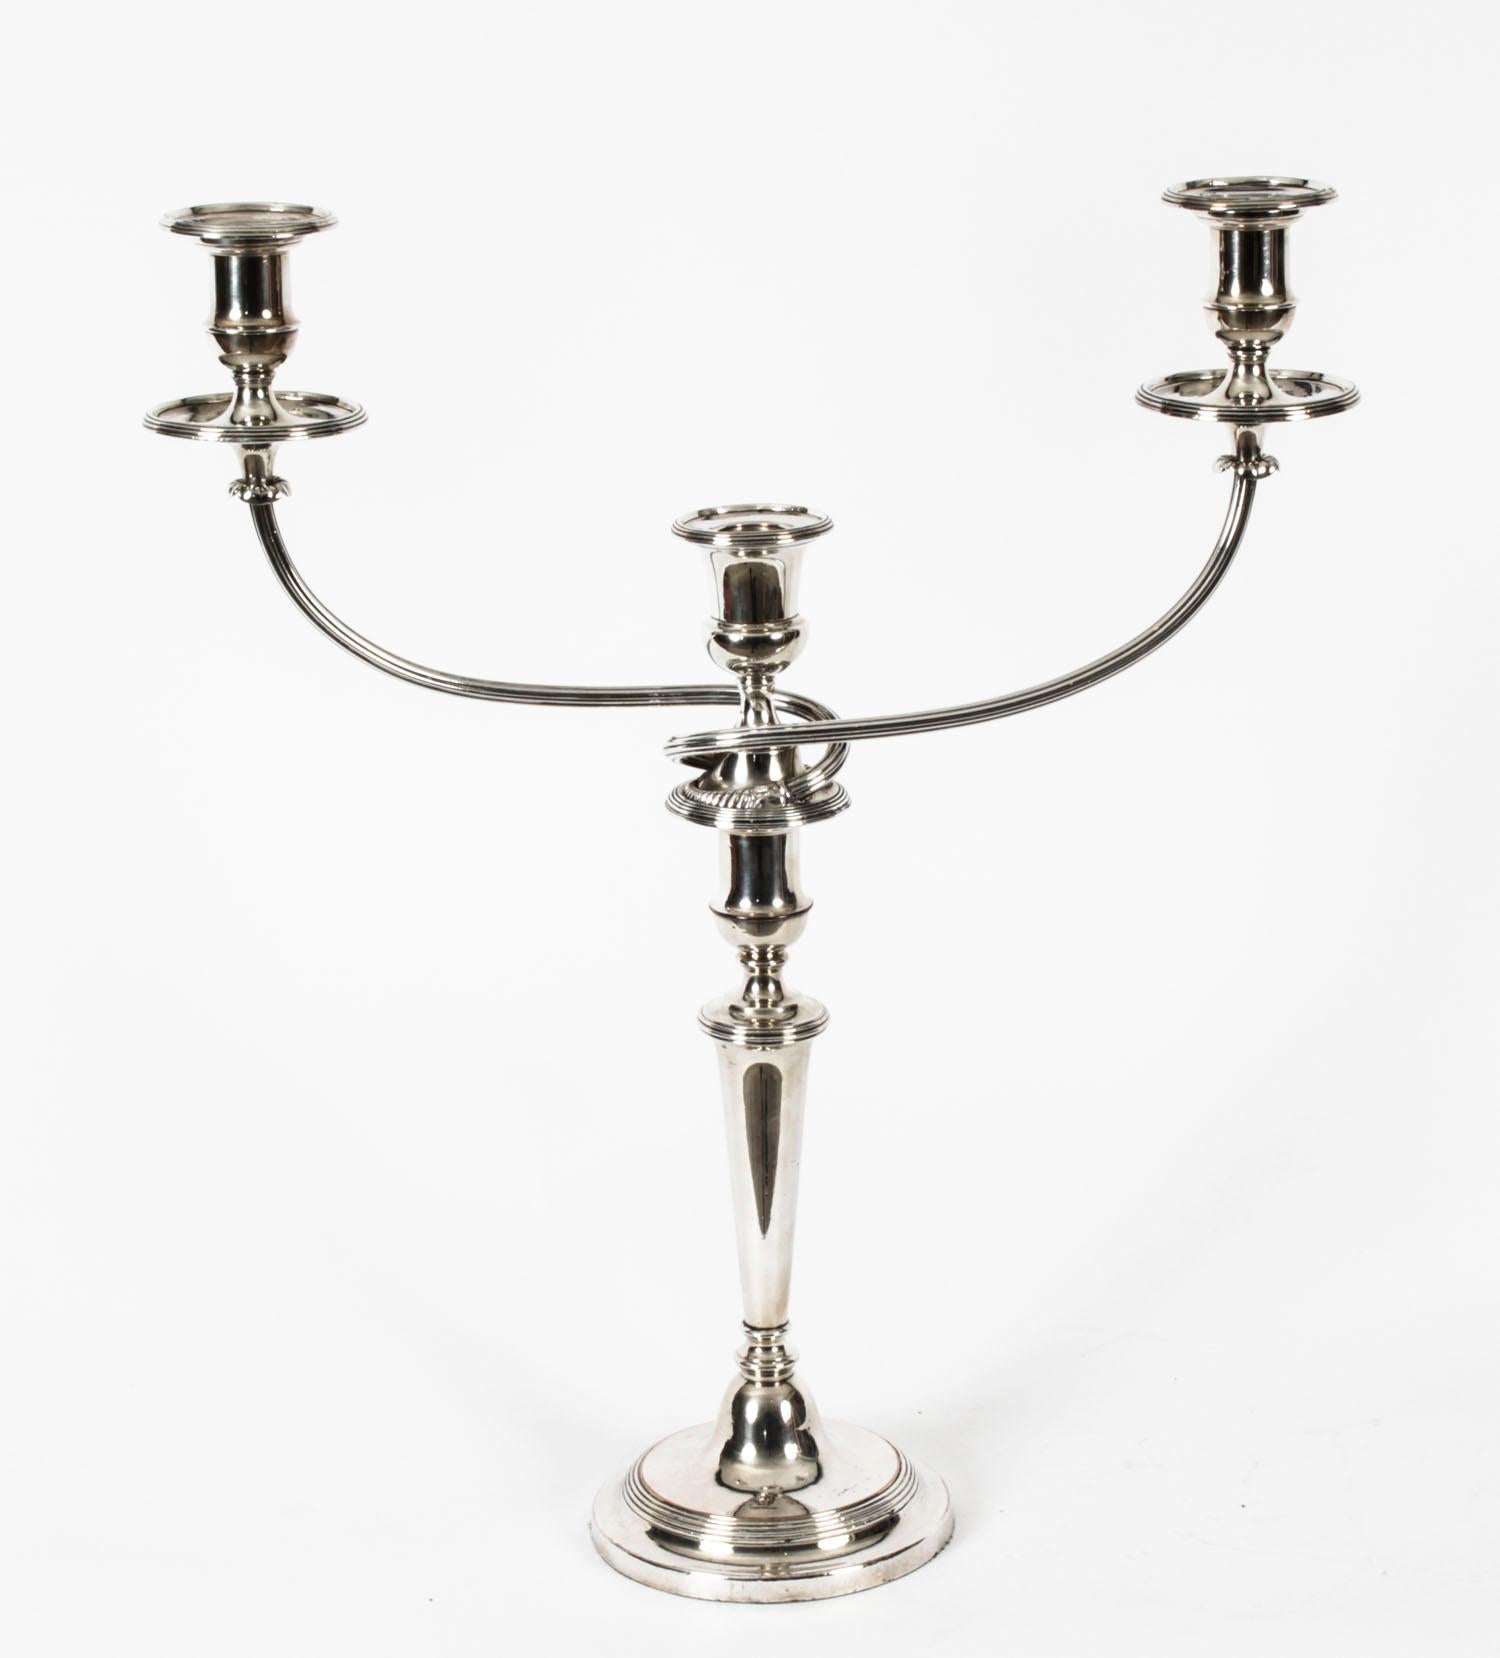 This is a stunning pair of antique English Old Sheffield silver on copper, three-light, two-branch table candelabras, circa 1780 in date, and bearing the makers mark of the renowned silversmith Matthew Boulton.
 
The candelabras feature detachable